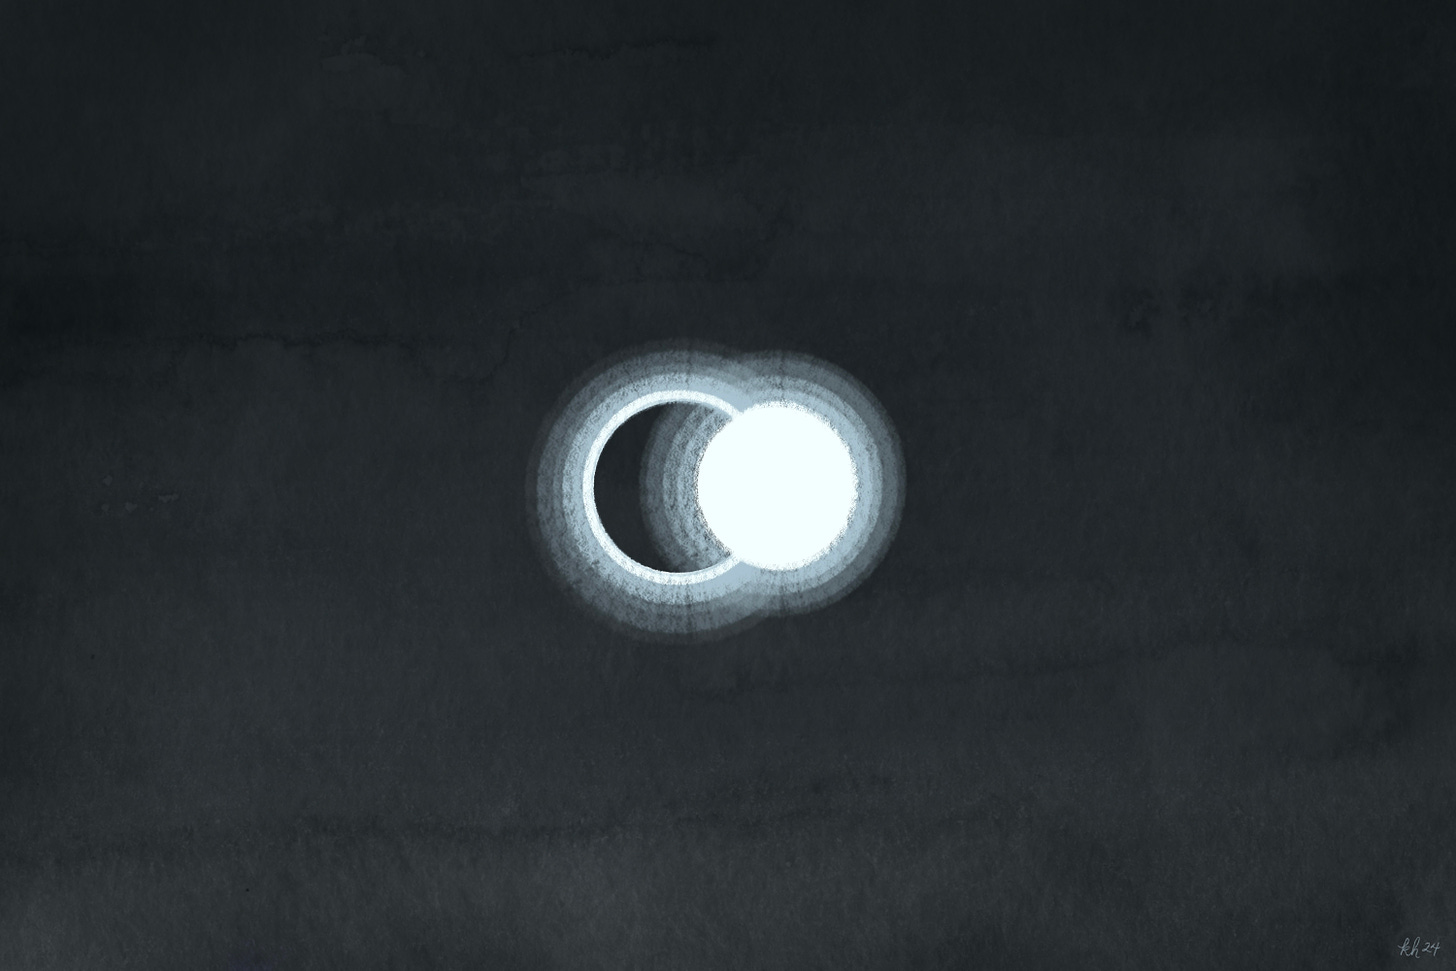 Abstract rendering of a total eclipse in watercolor and pastels. The sun and moon are overlapping circles, with concentric rings emanating from each.